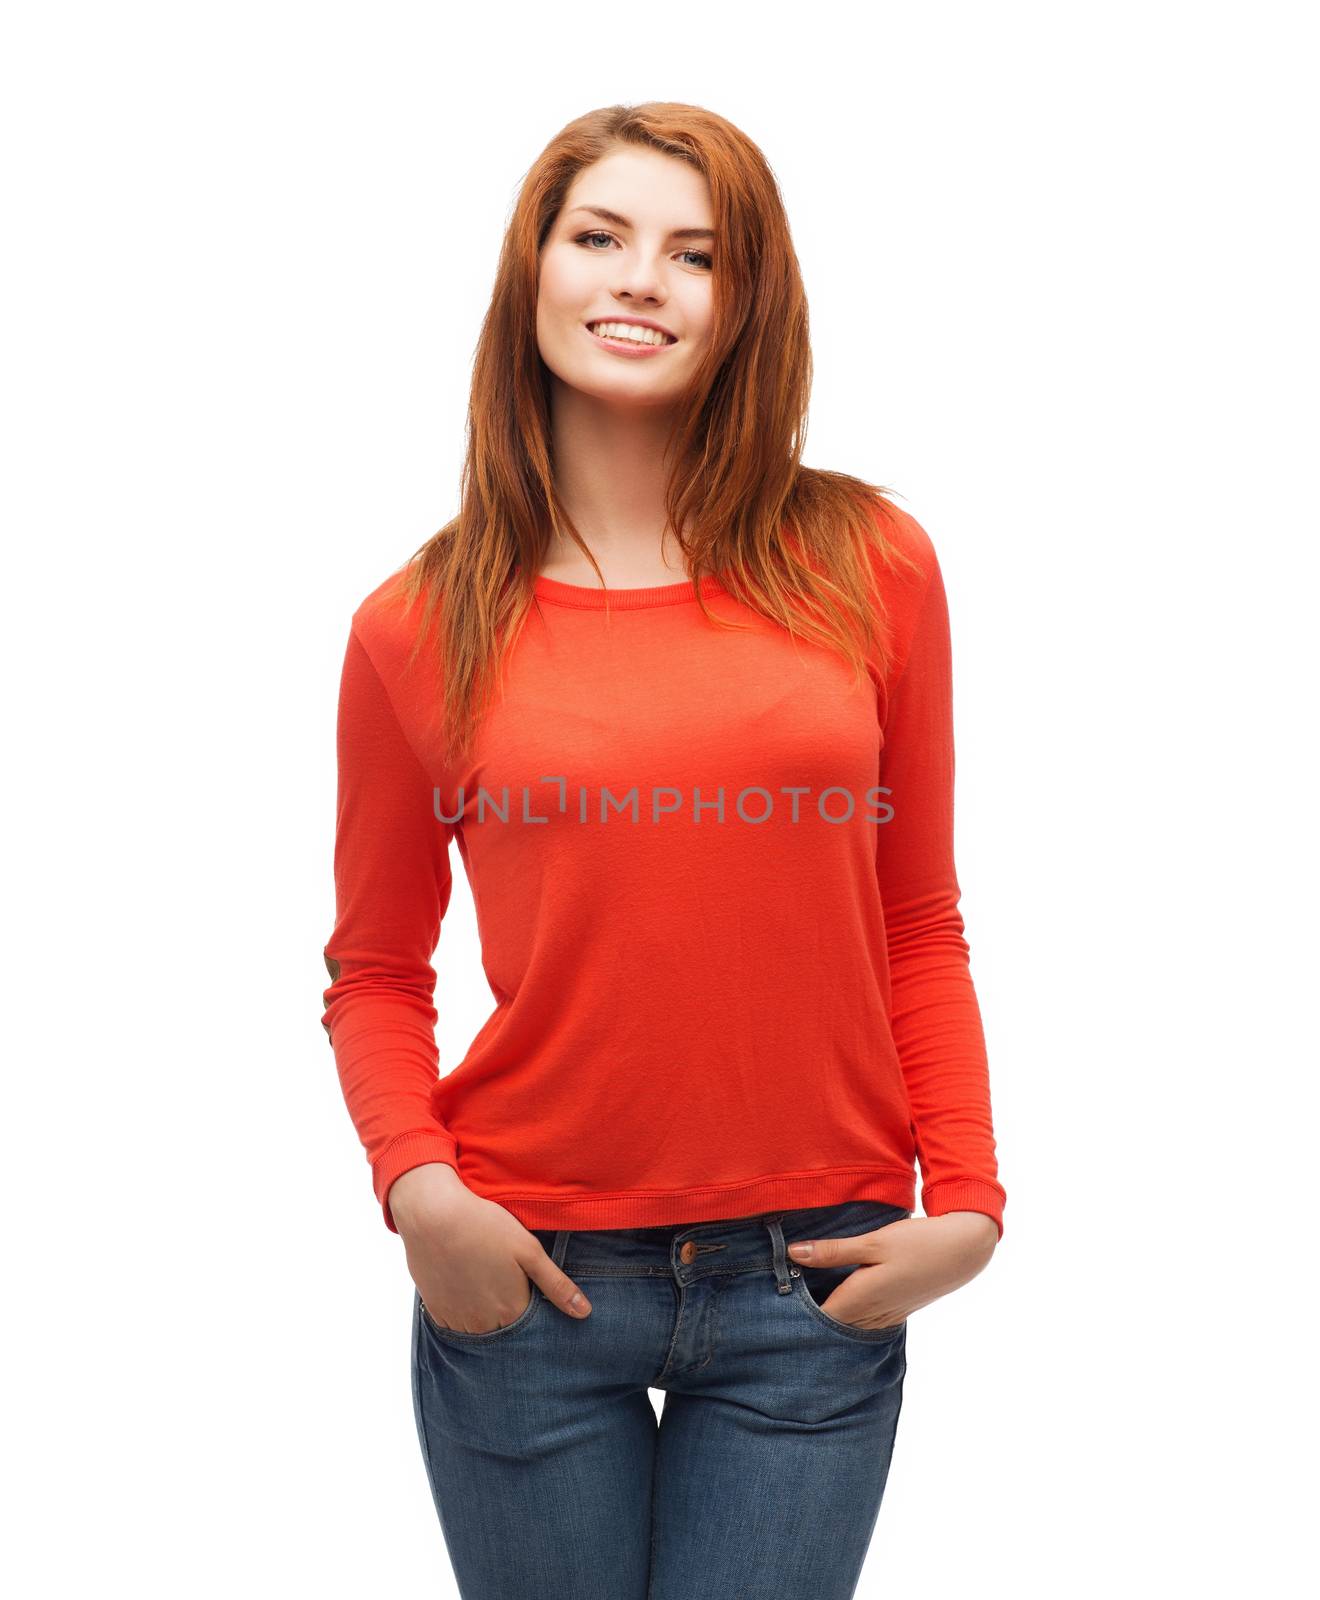 happiness and people concept - smiling teenager in casual top and jeans